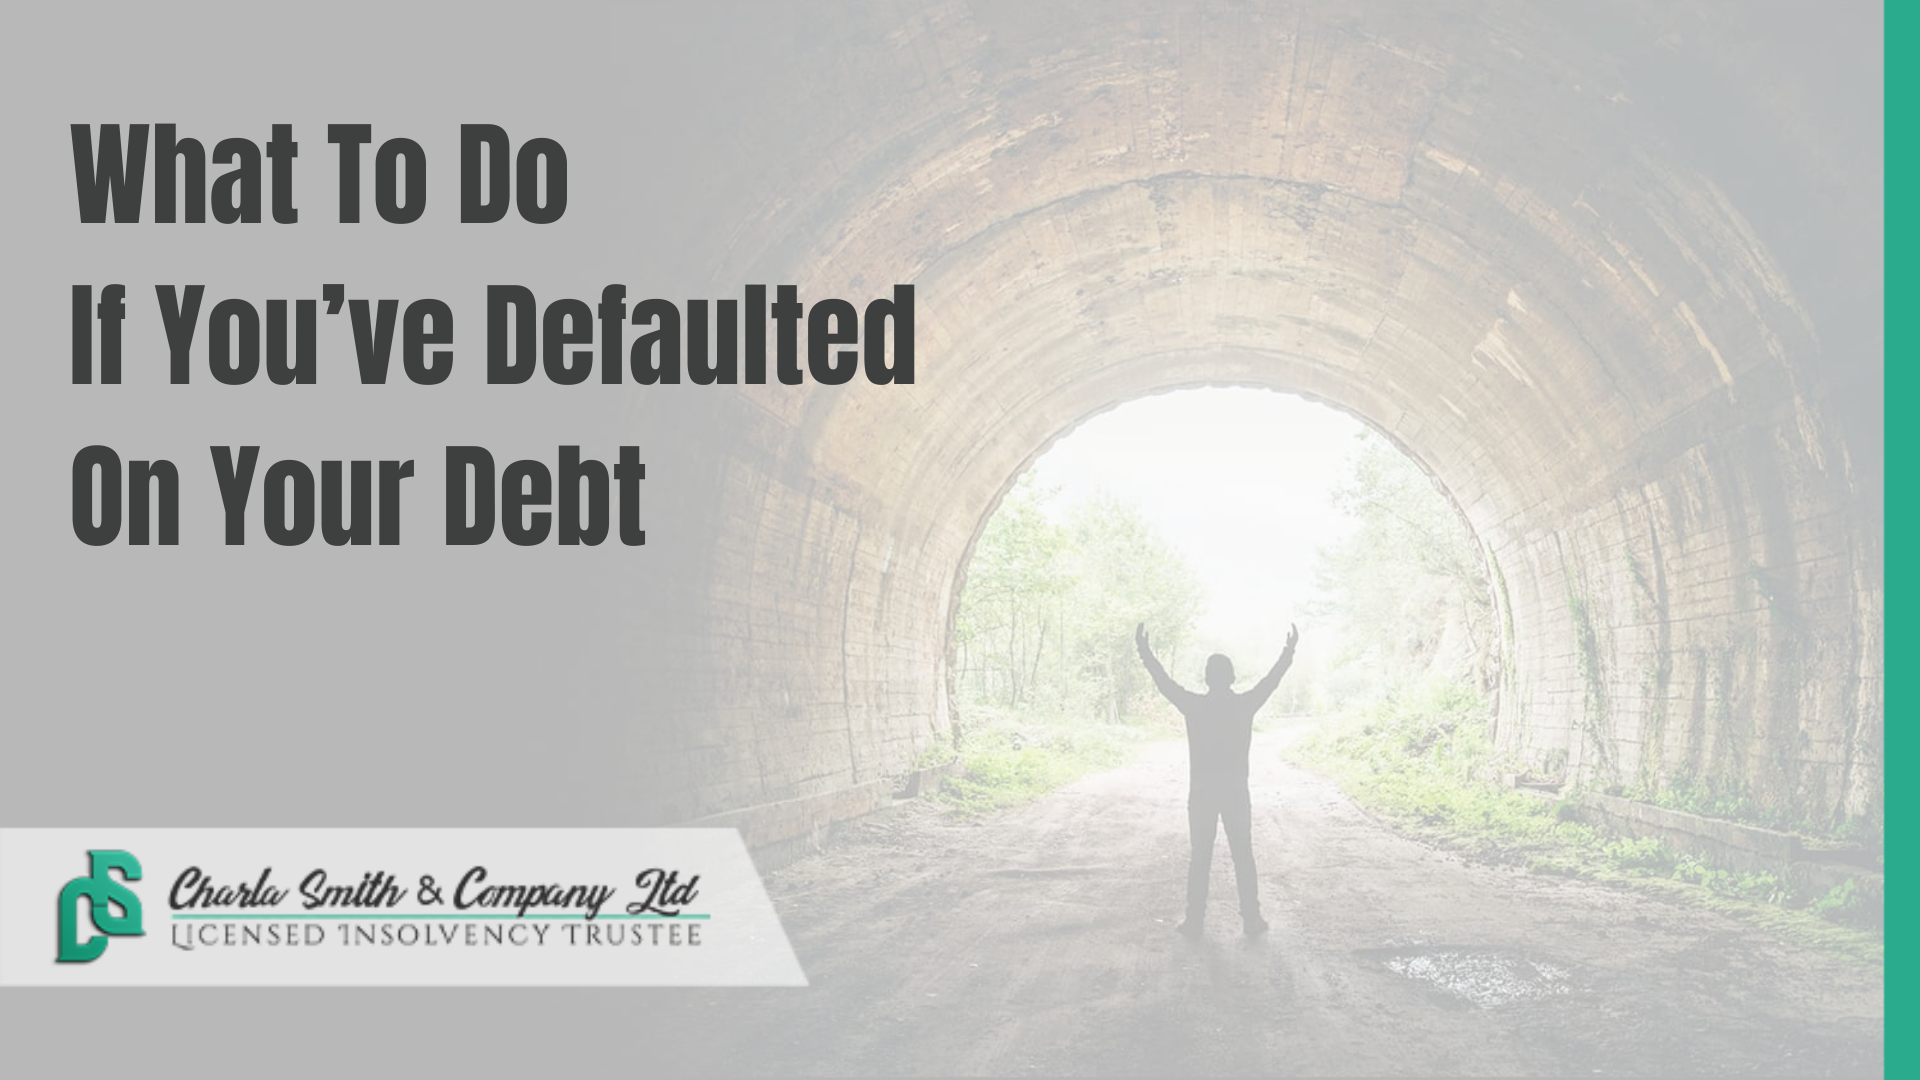 What To Do If You’ve Defaulted On Your Debt